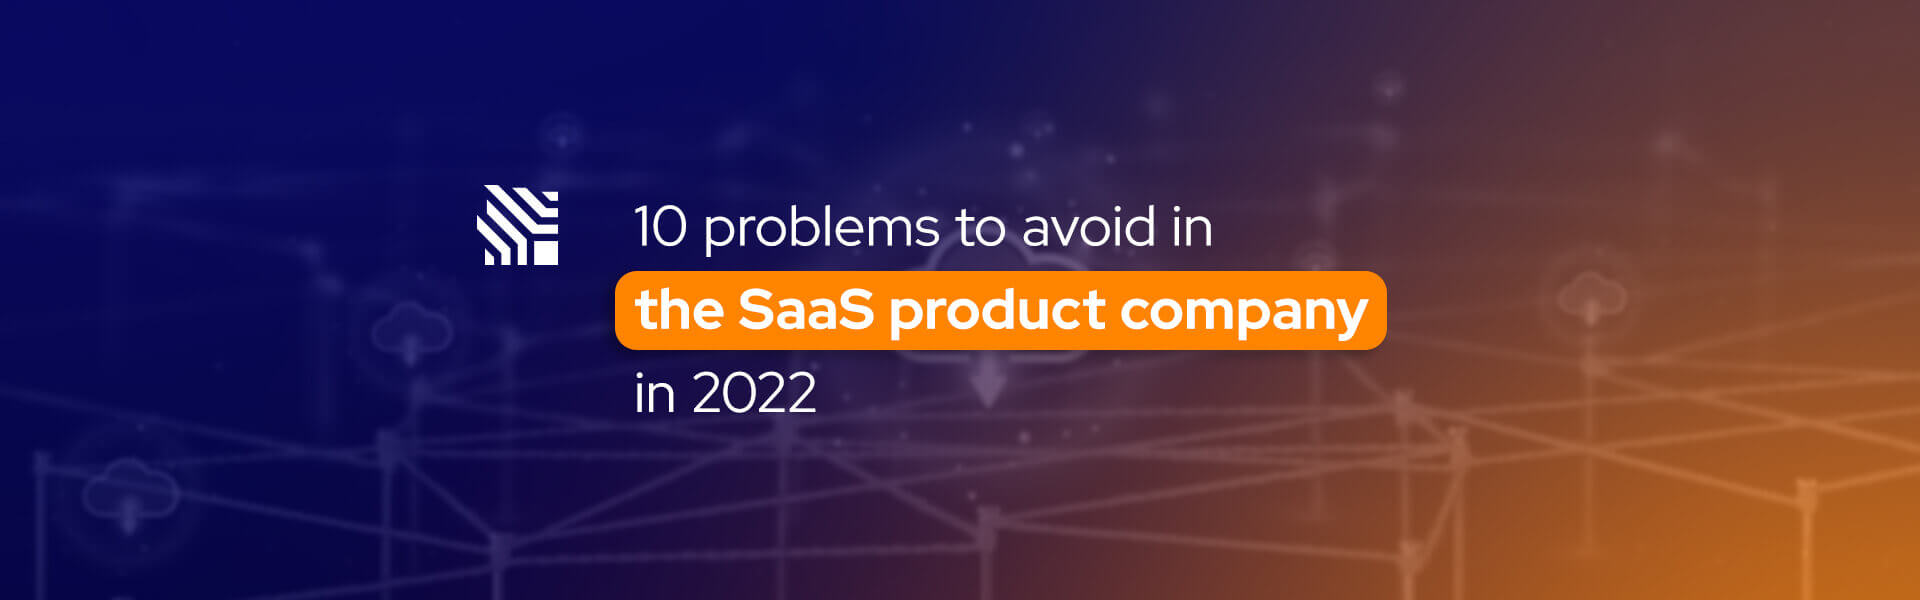 10 problems to avoid in the SaaS product company in 2022